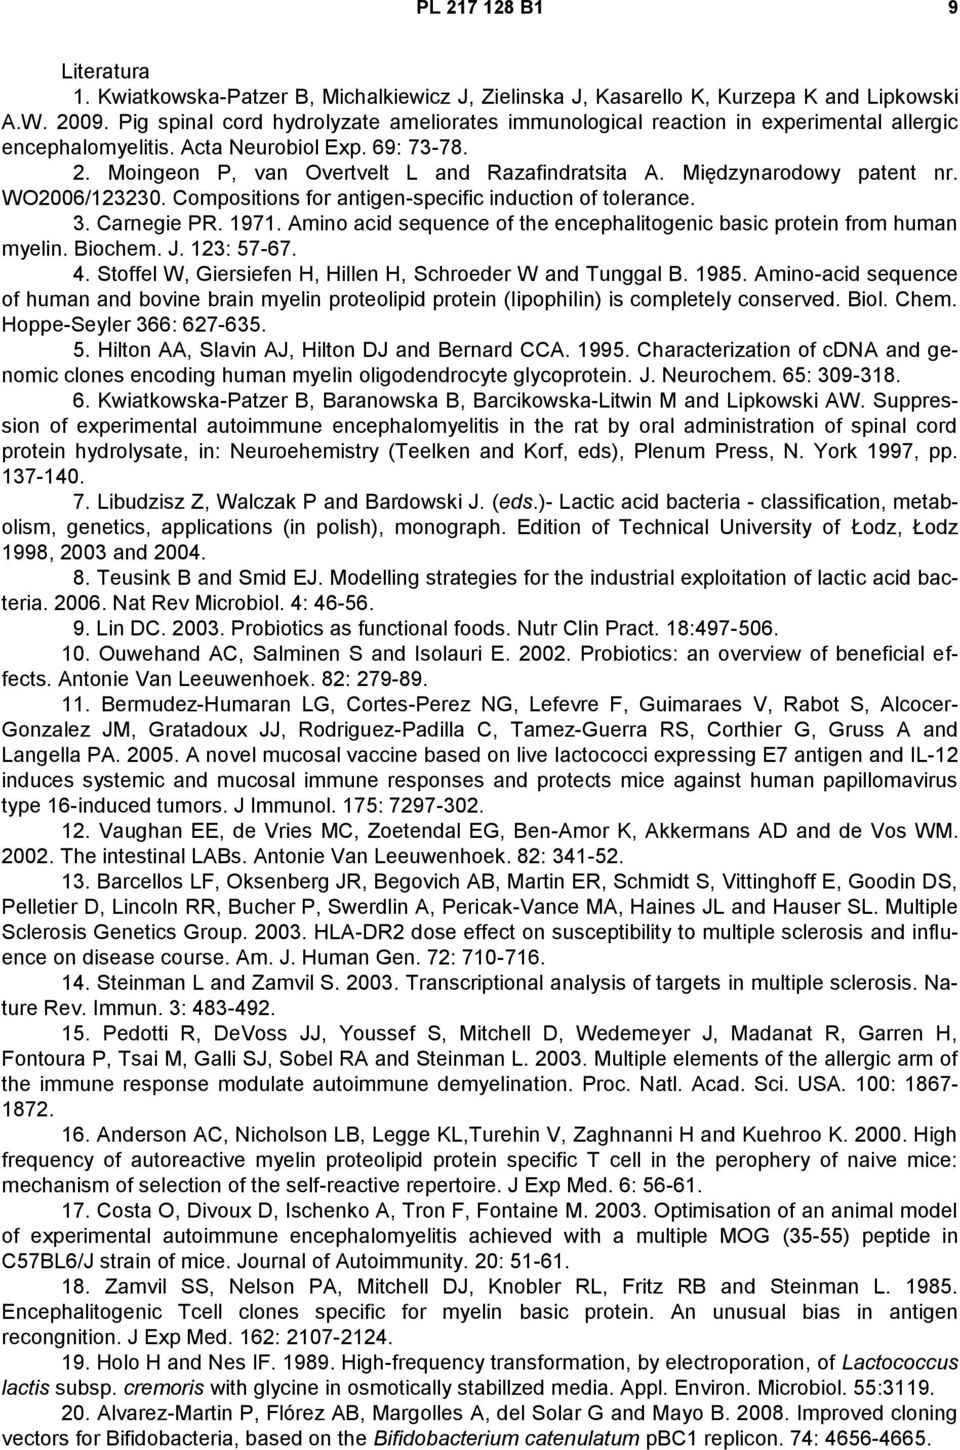 Międzynarodowy patent nr. WO2006/123230. Compositions for antigen-specific induction of tolerance. 3. Carnegie PR. 1971. Amino acid sequence of the encephalitogenic basic protein from human myelin.